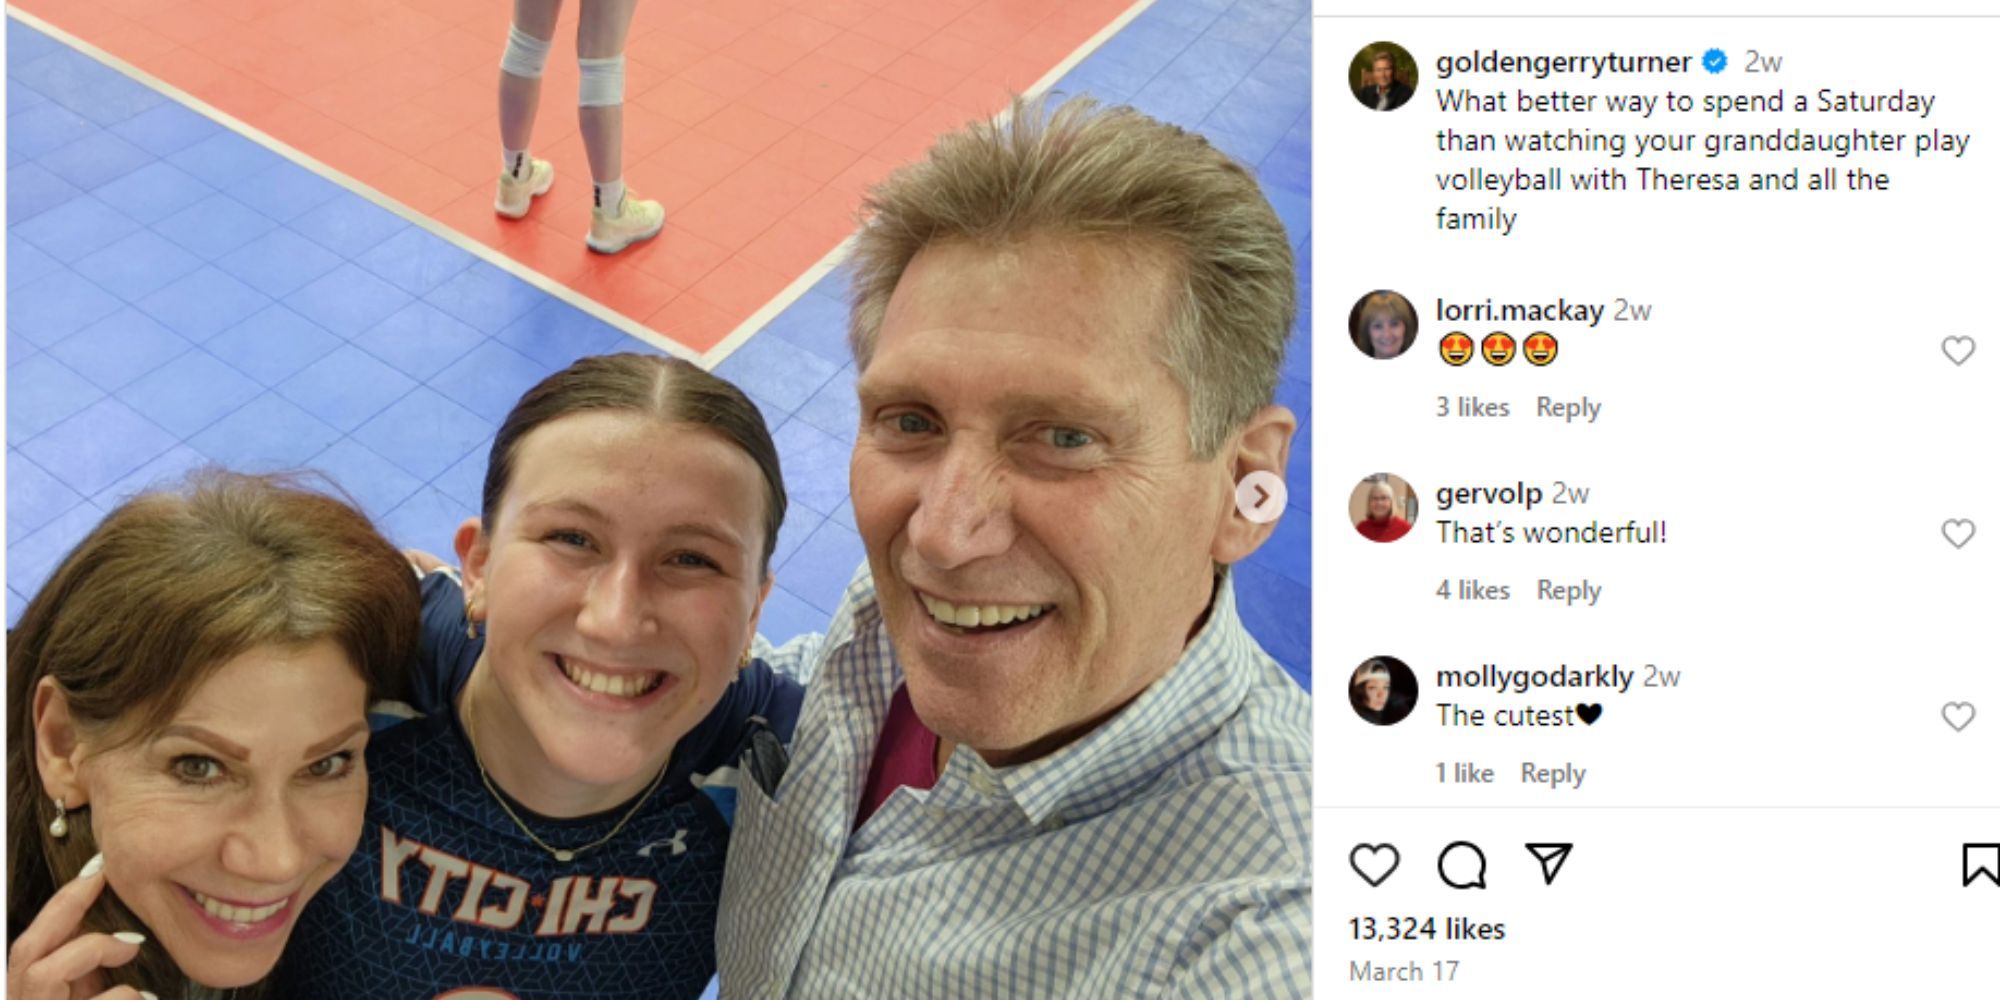 The Golden bachelor, Gerry Turner, Theresa Nist & Gerry's grandaughter posing together for a selfie at a volleyball game